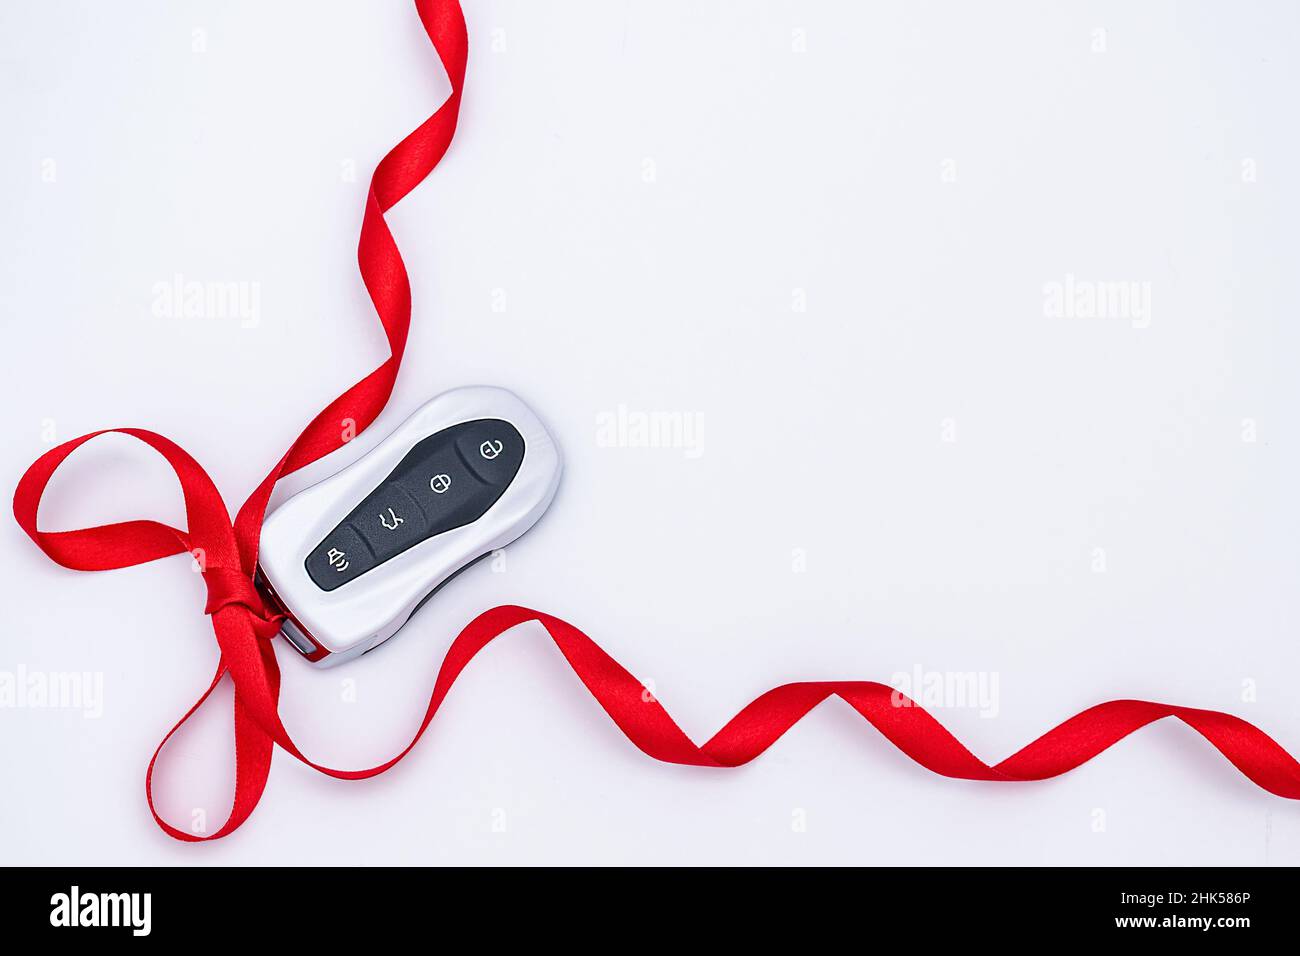 Flat lay smart car key with a red gift ribbon on a white background. Electronics, spare parts and car accessories. Concept and gift idea. Horizontal p Stock Photo